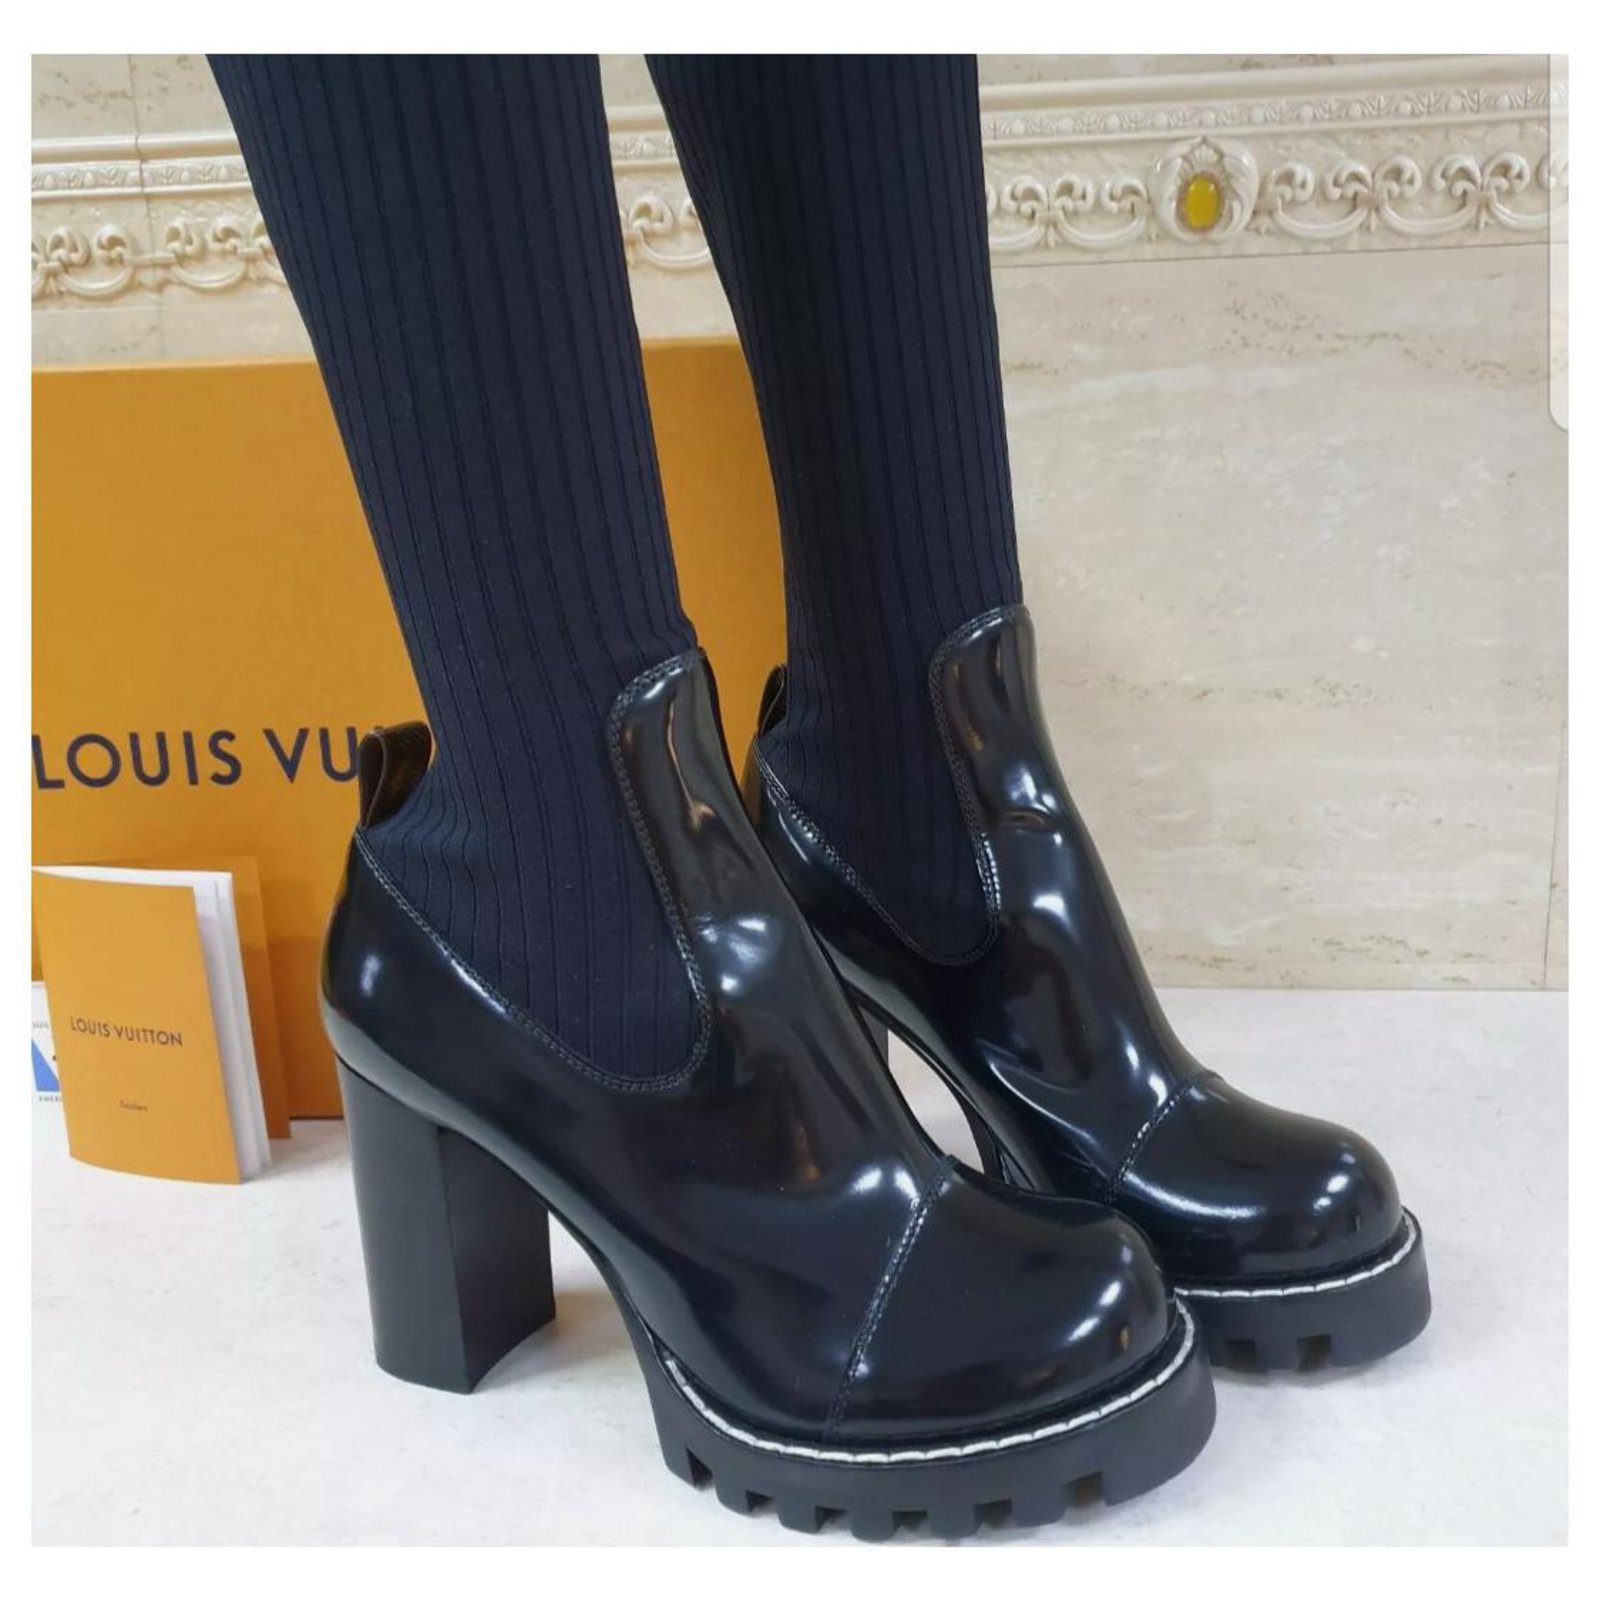 Louis Vuitton Limitless Black Leather Ankle Boots New